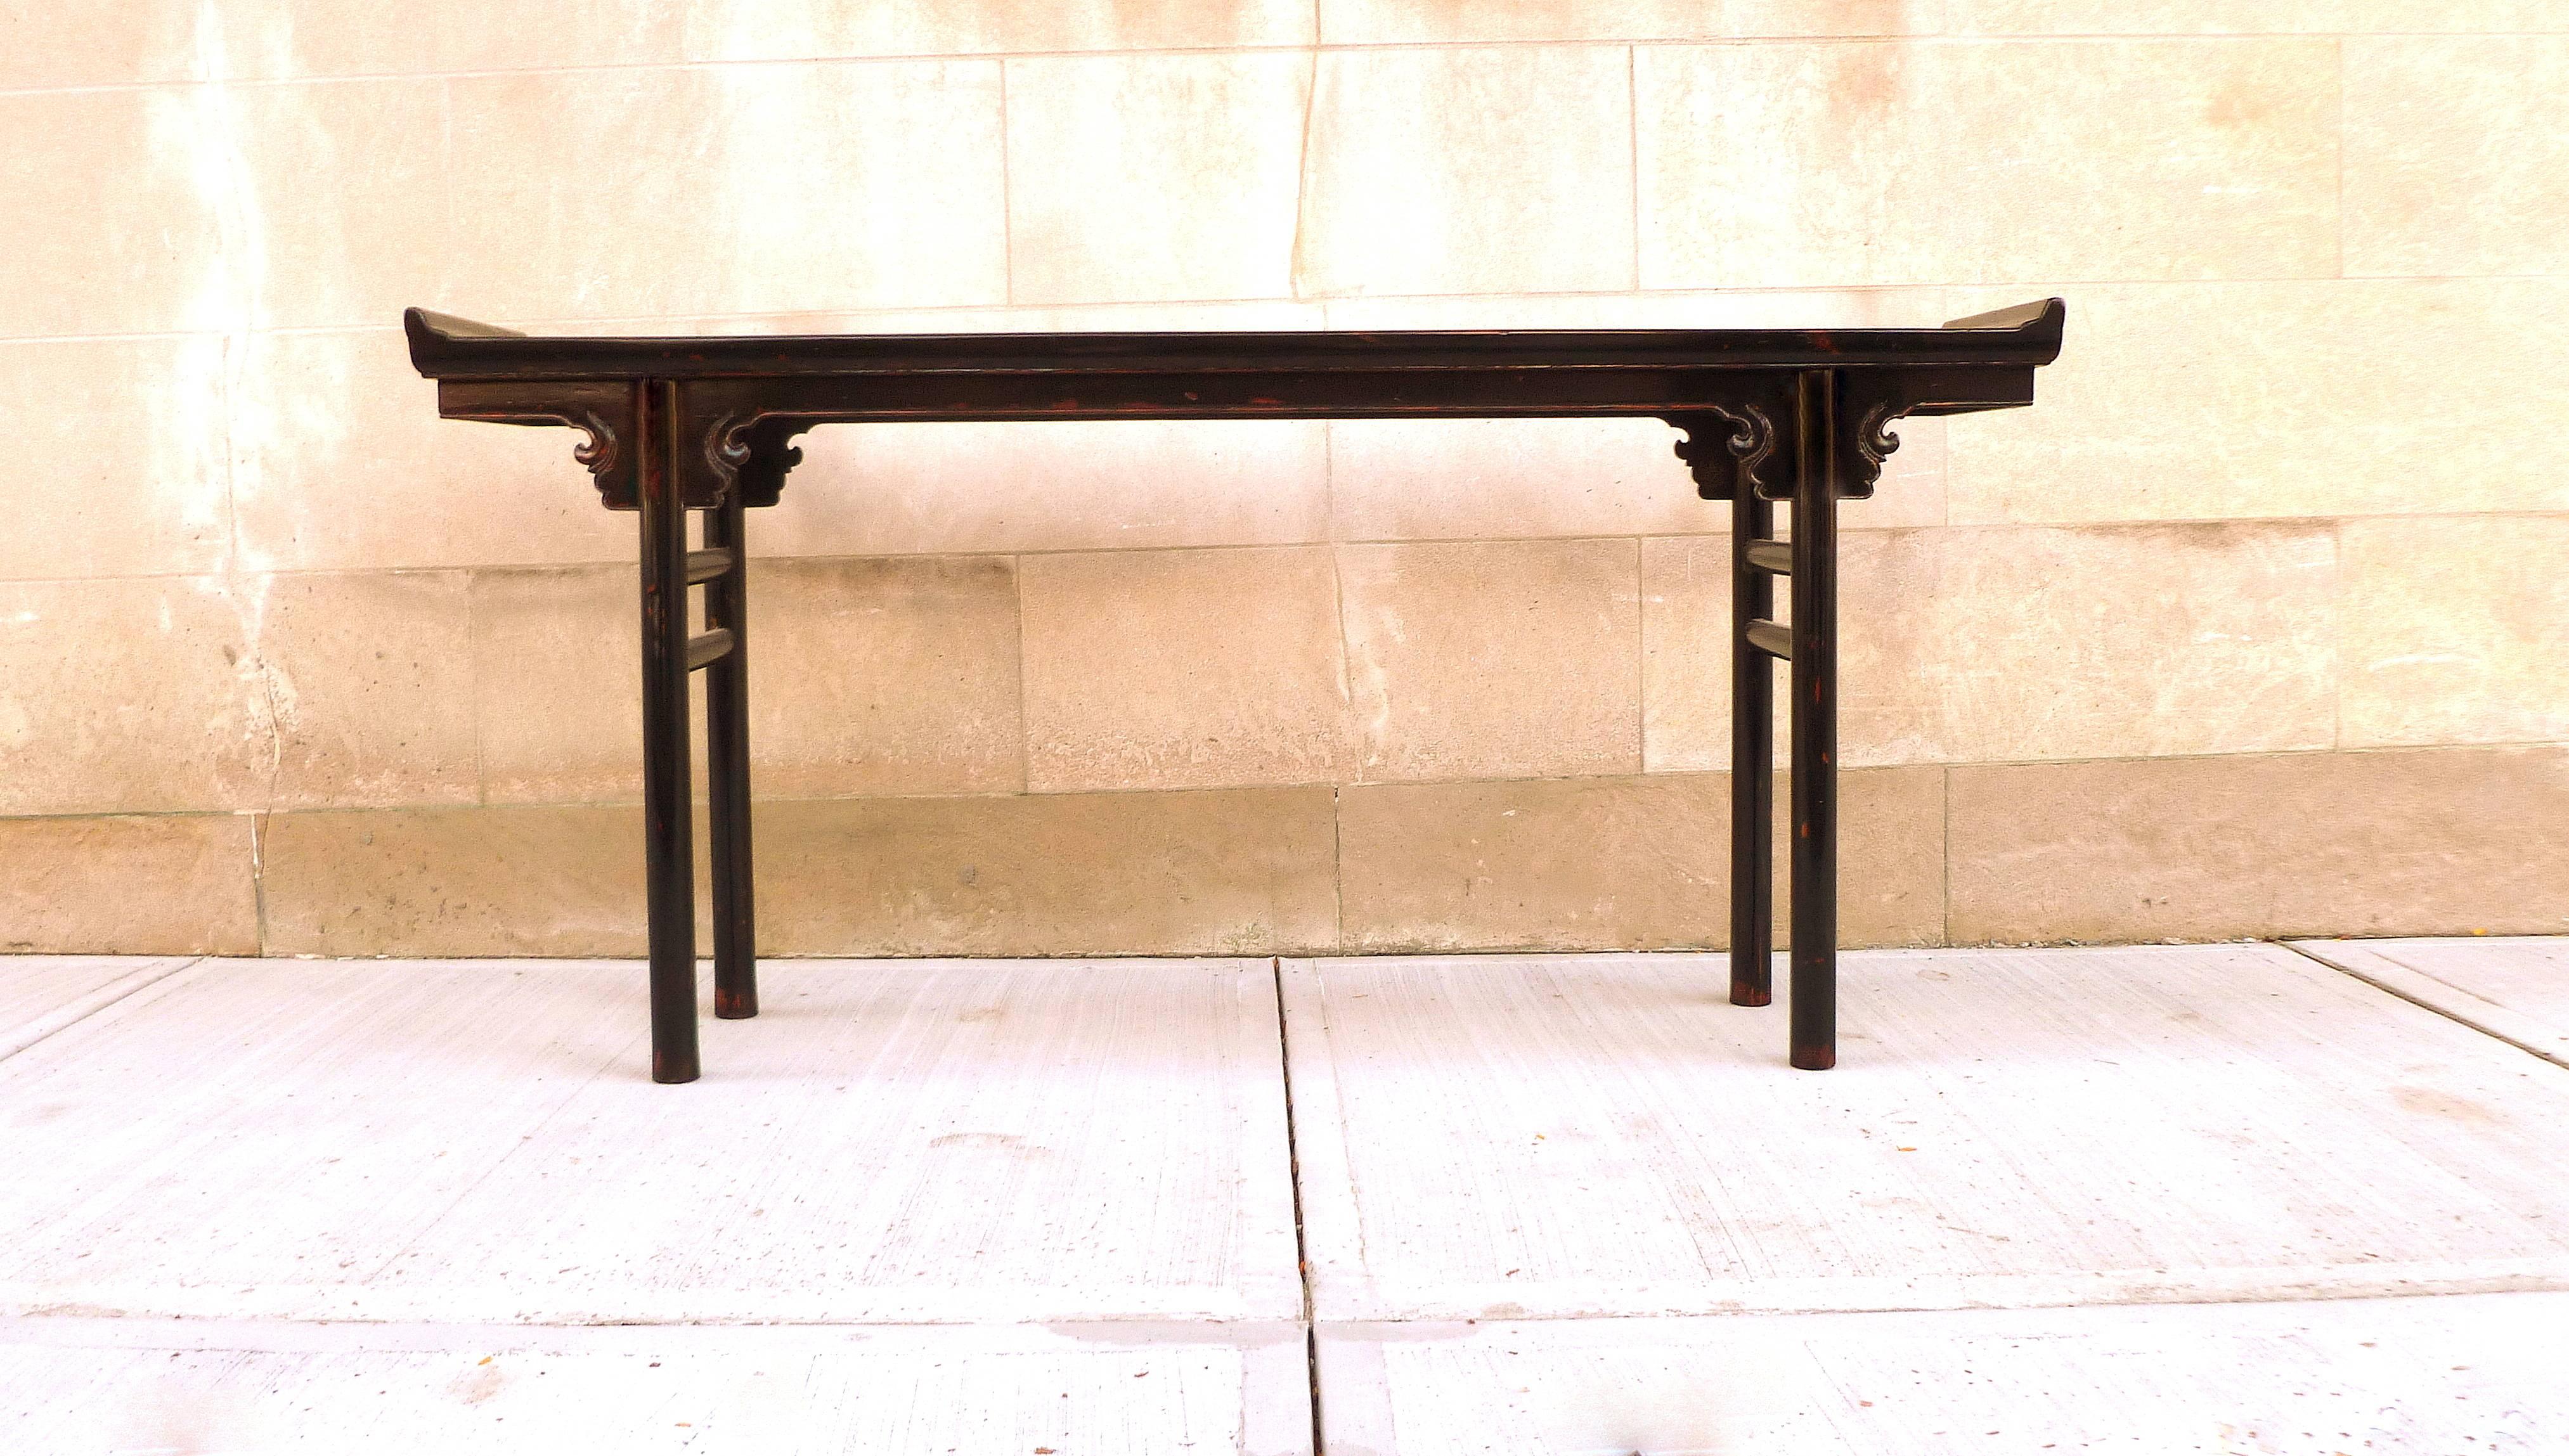 Black lacquer console table / altar table with everted flanges, elegant detail and lines.